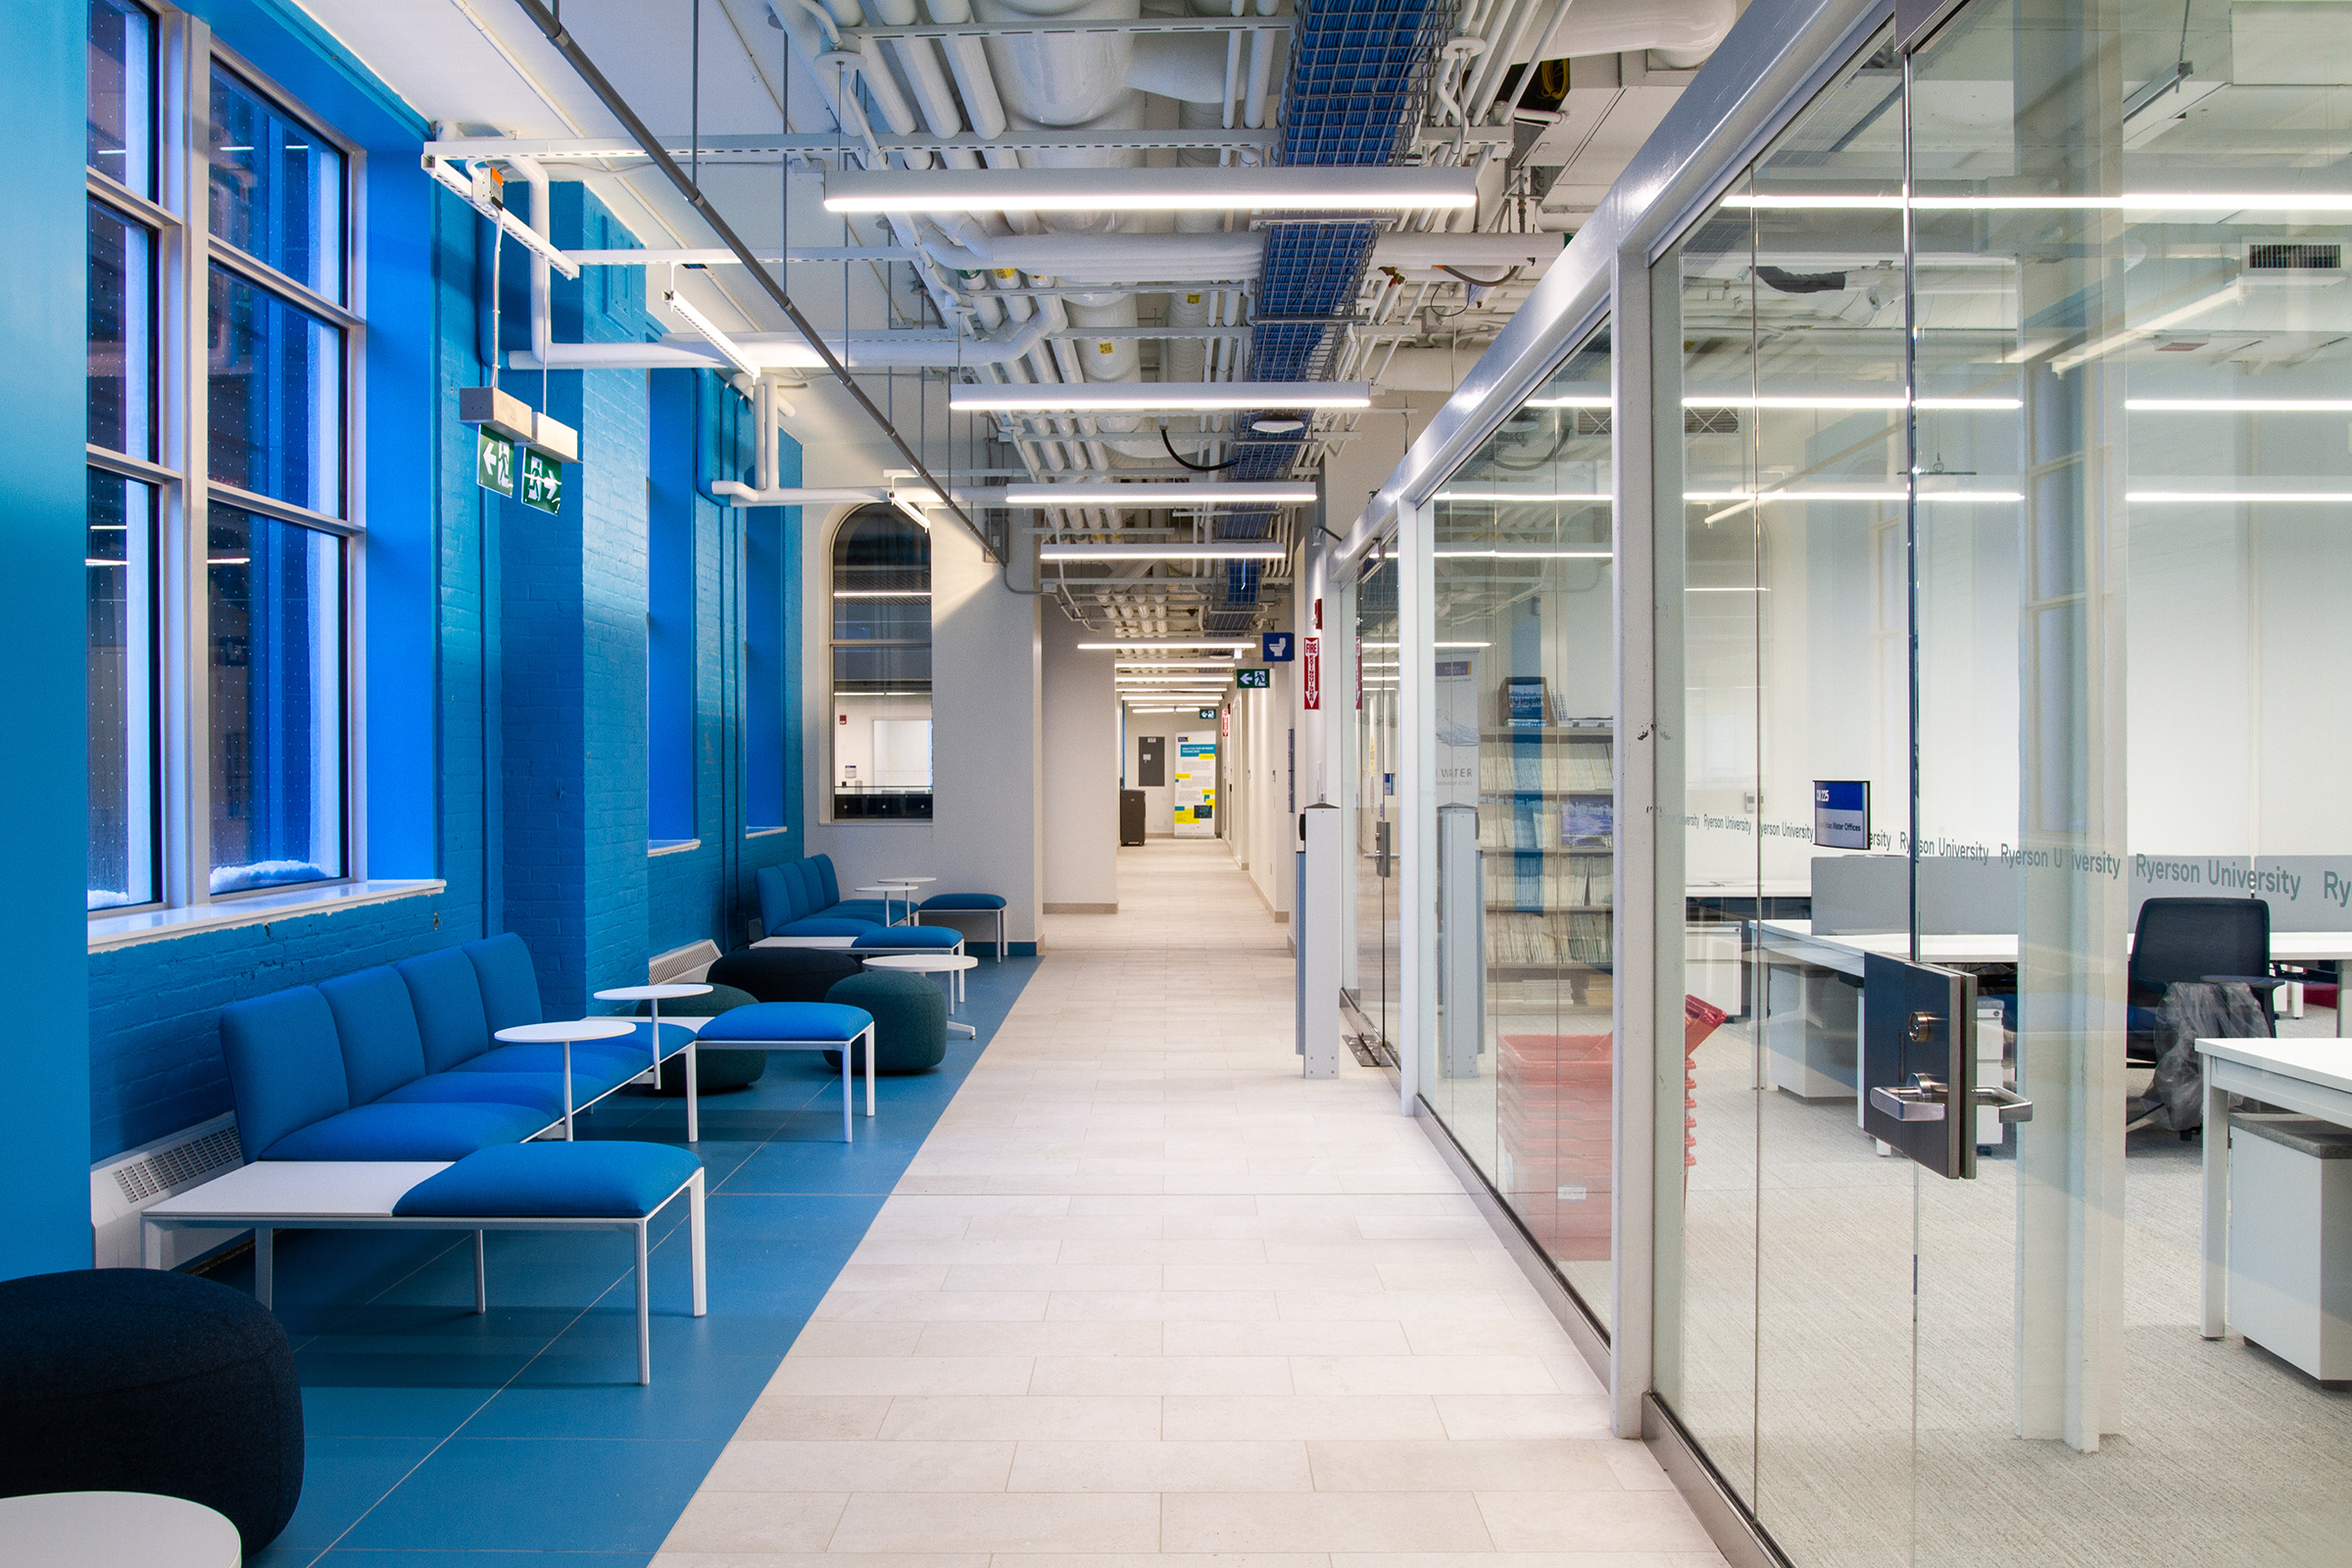 A side hallway in the Centre for Urban Innovation, showcasing seating area and blue brick wall